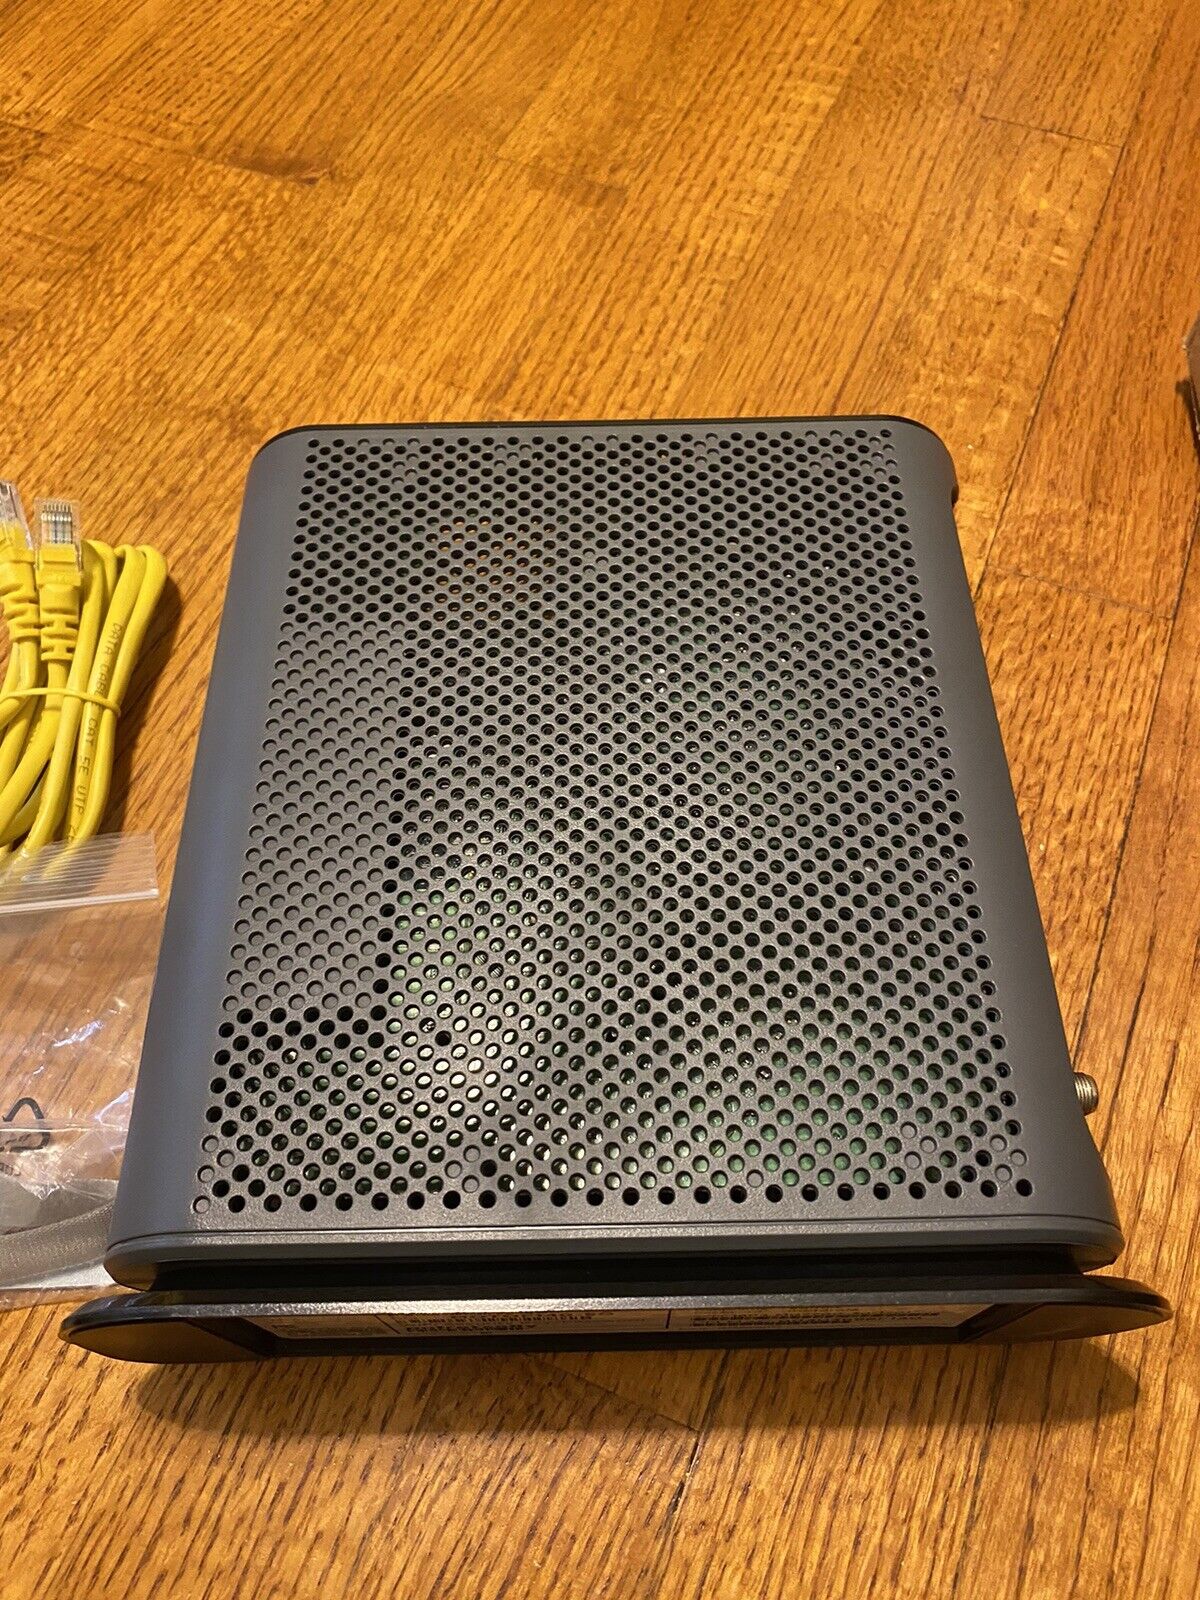 Motorola MG7700 Black  Cable Modem Plus 1900 Router - Open Box New - SEE BELOW